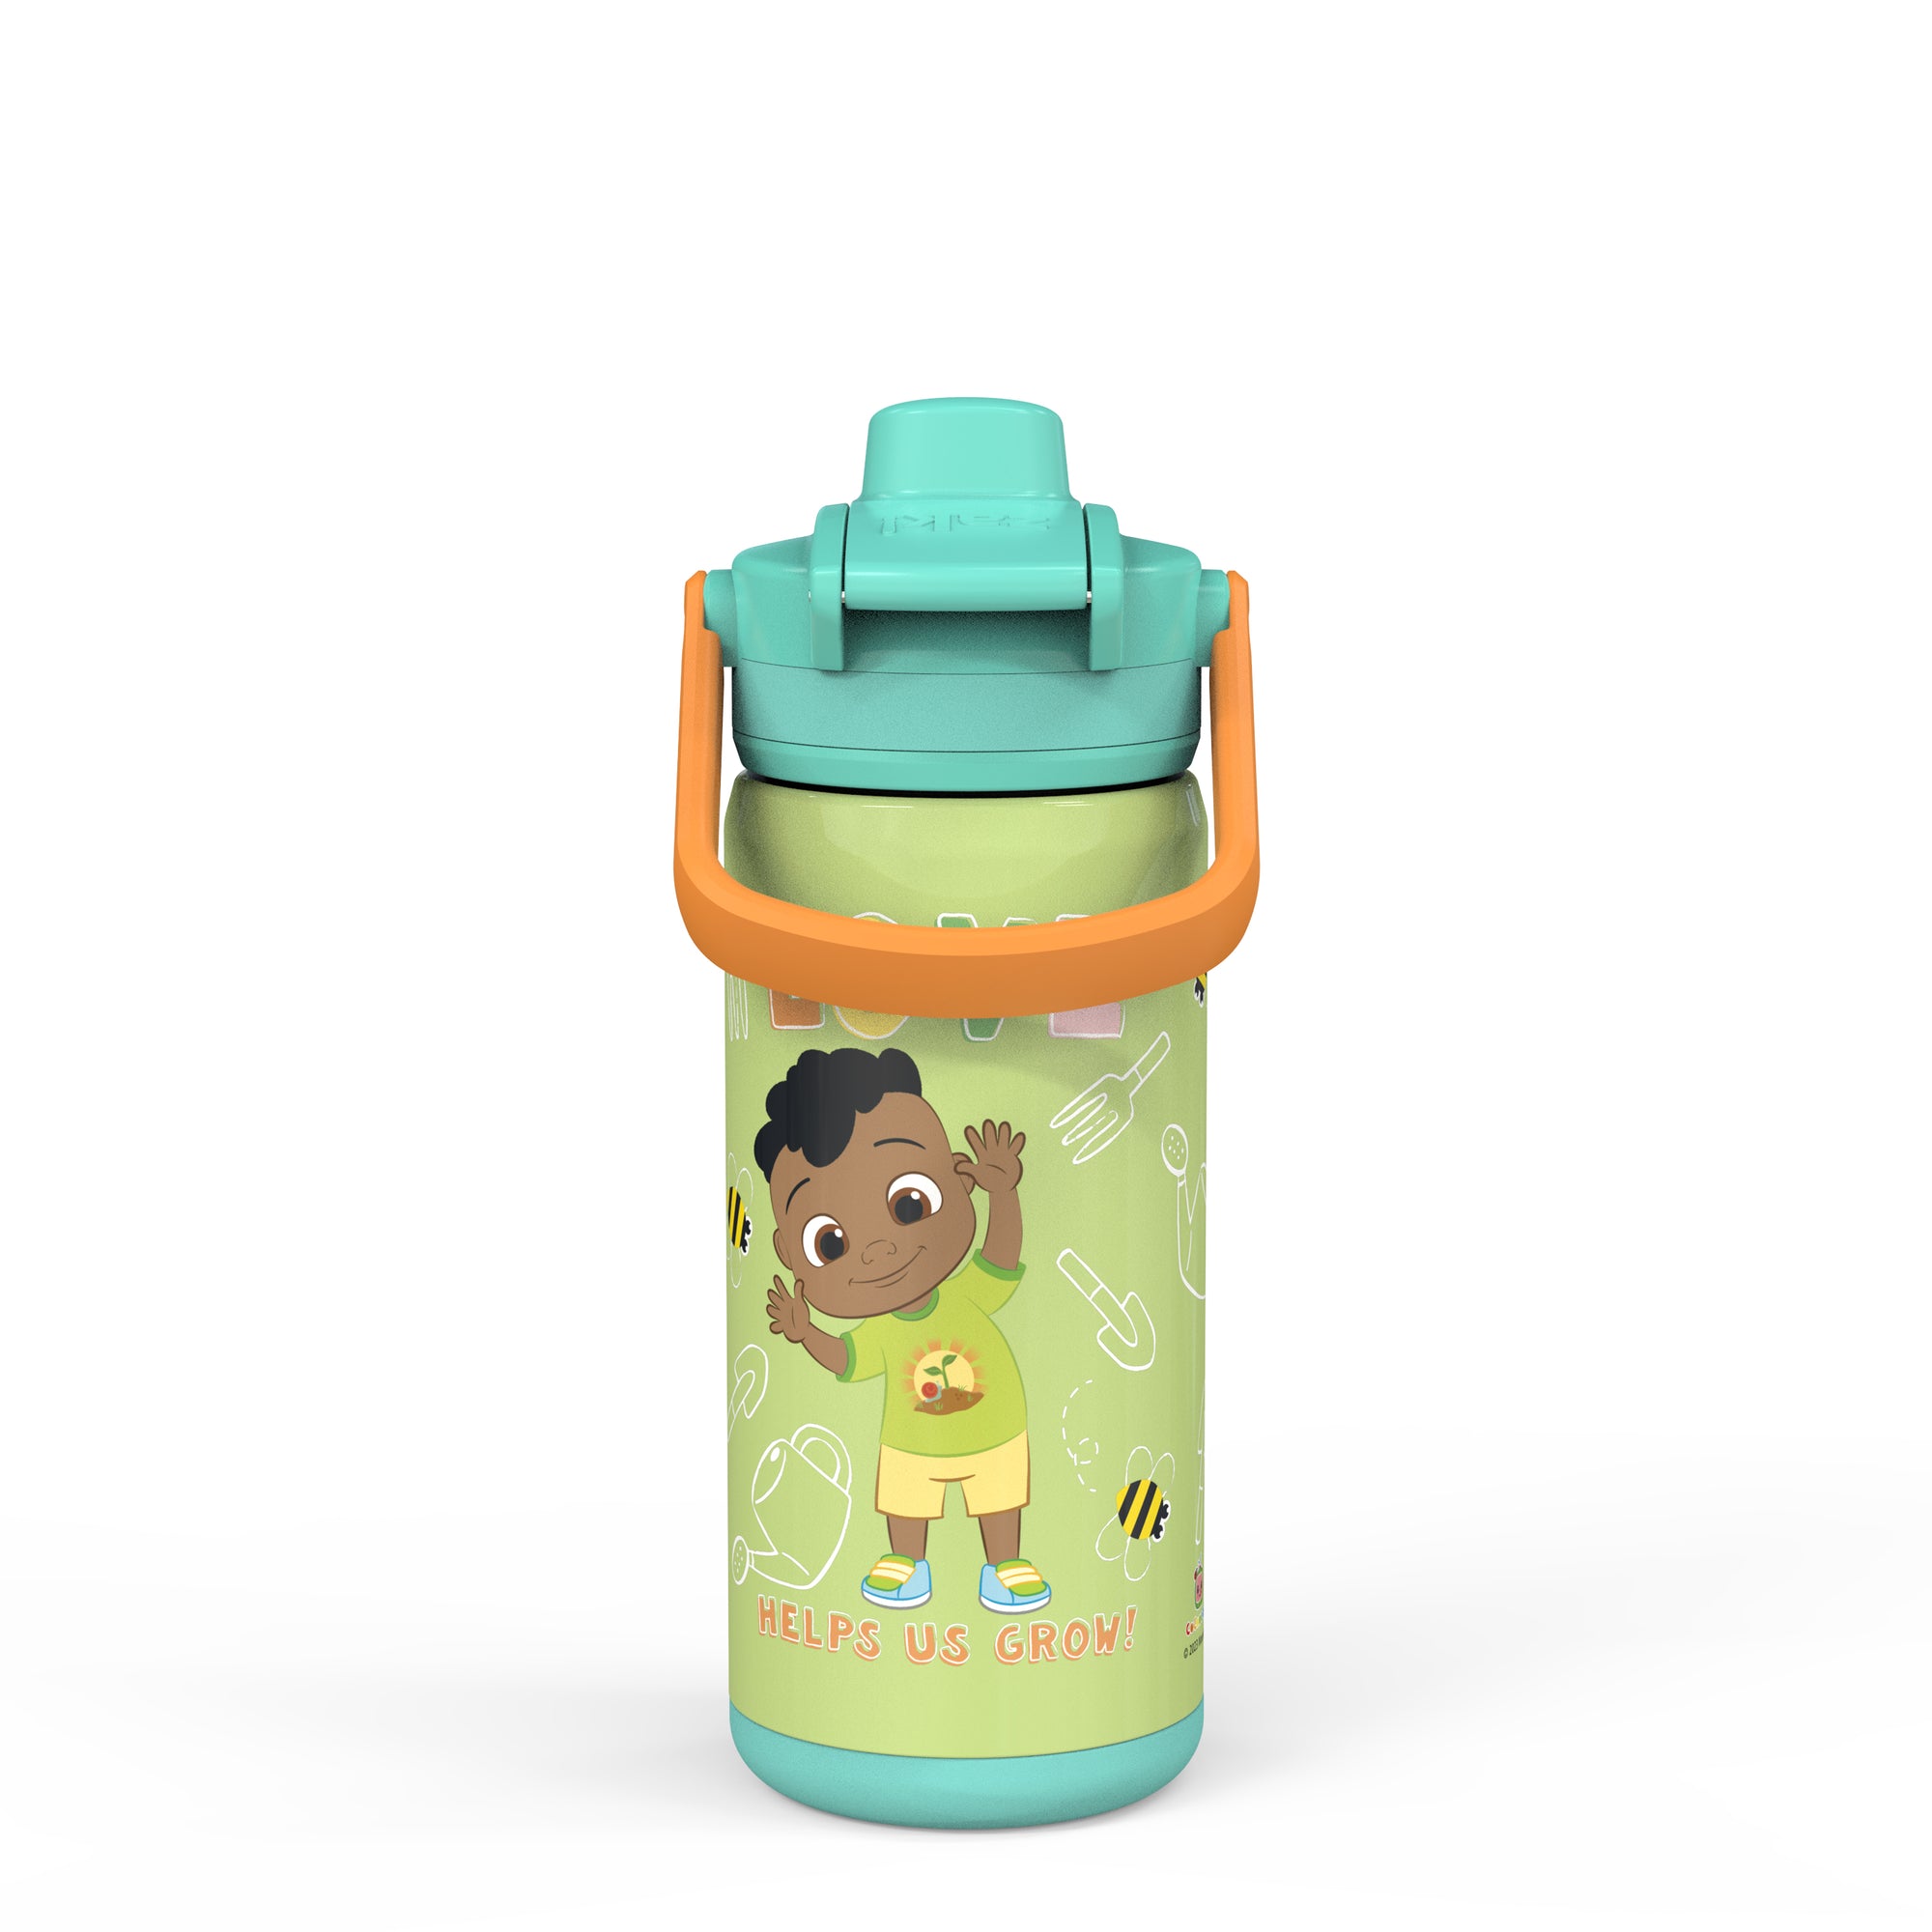 CoComelon Beacon Stainless Steel Insulated Kids Water Bottle with Covered Spout, 14 Ounces